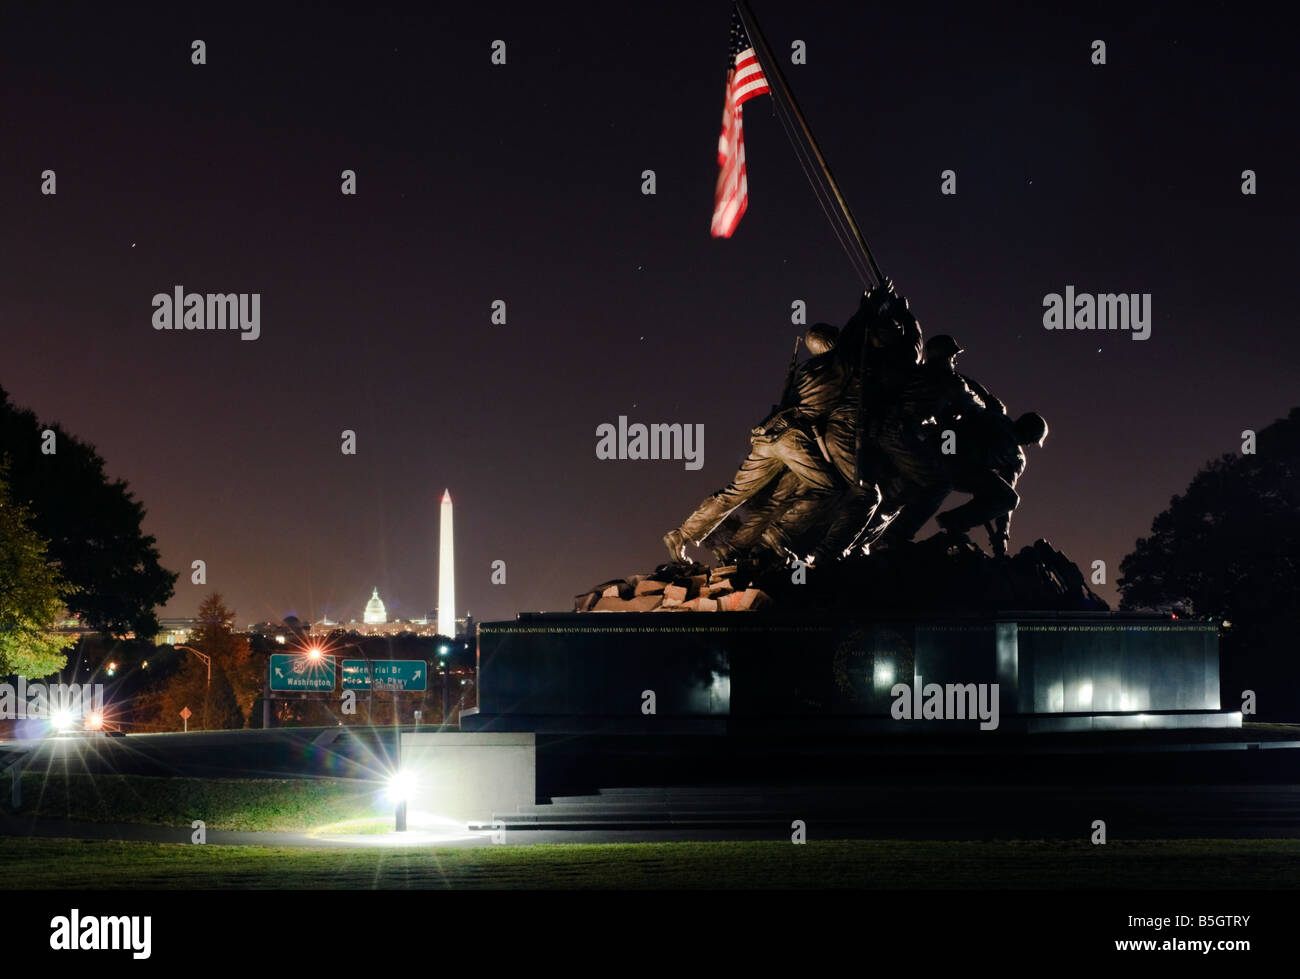 Iwo Jima Memorial at night with the Washington Monument and the Capitol Building shining in the background. Stock Photo